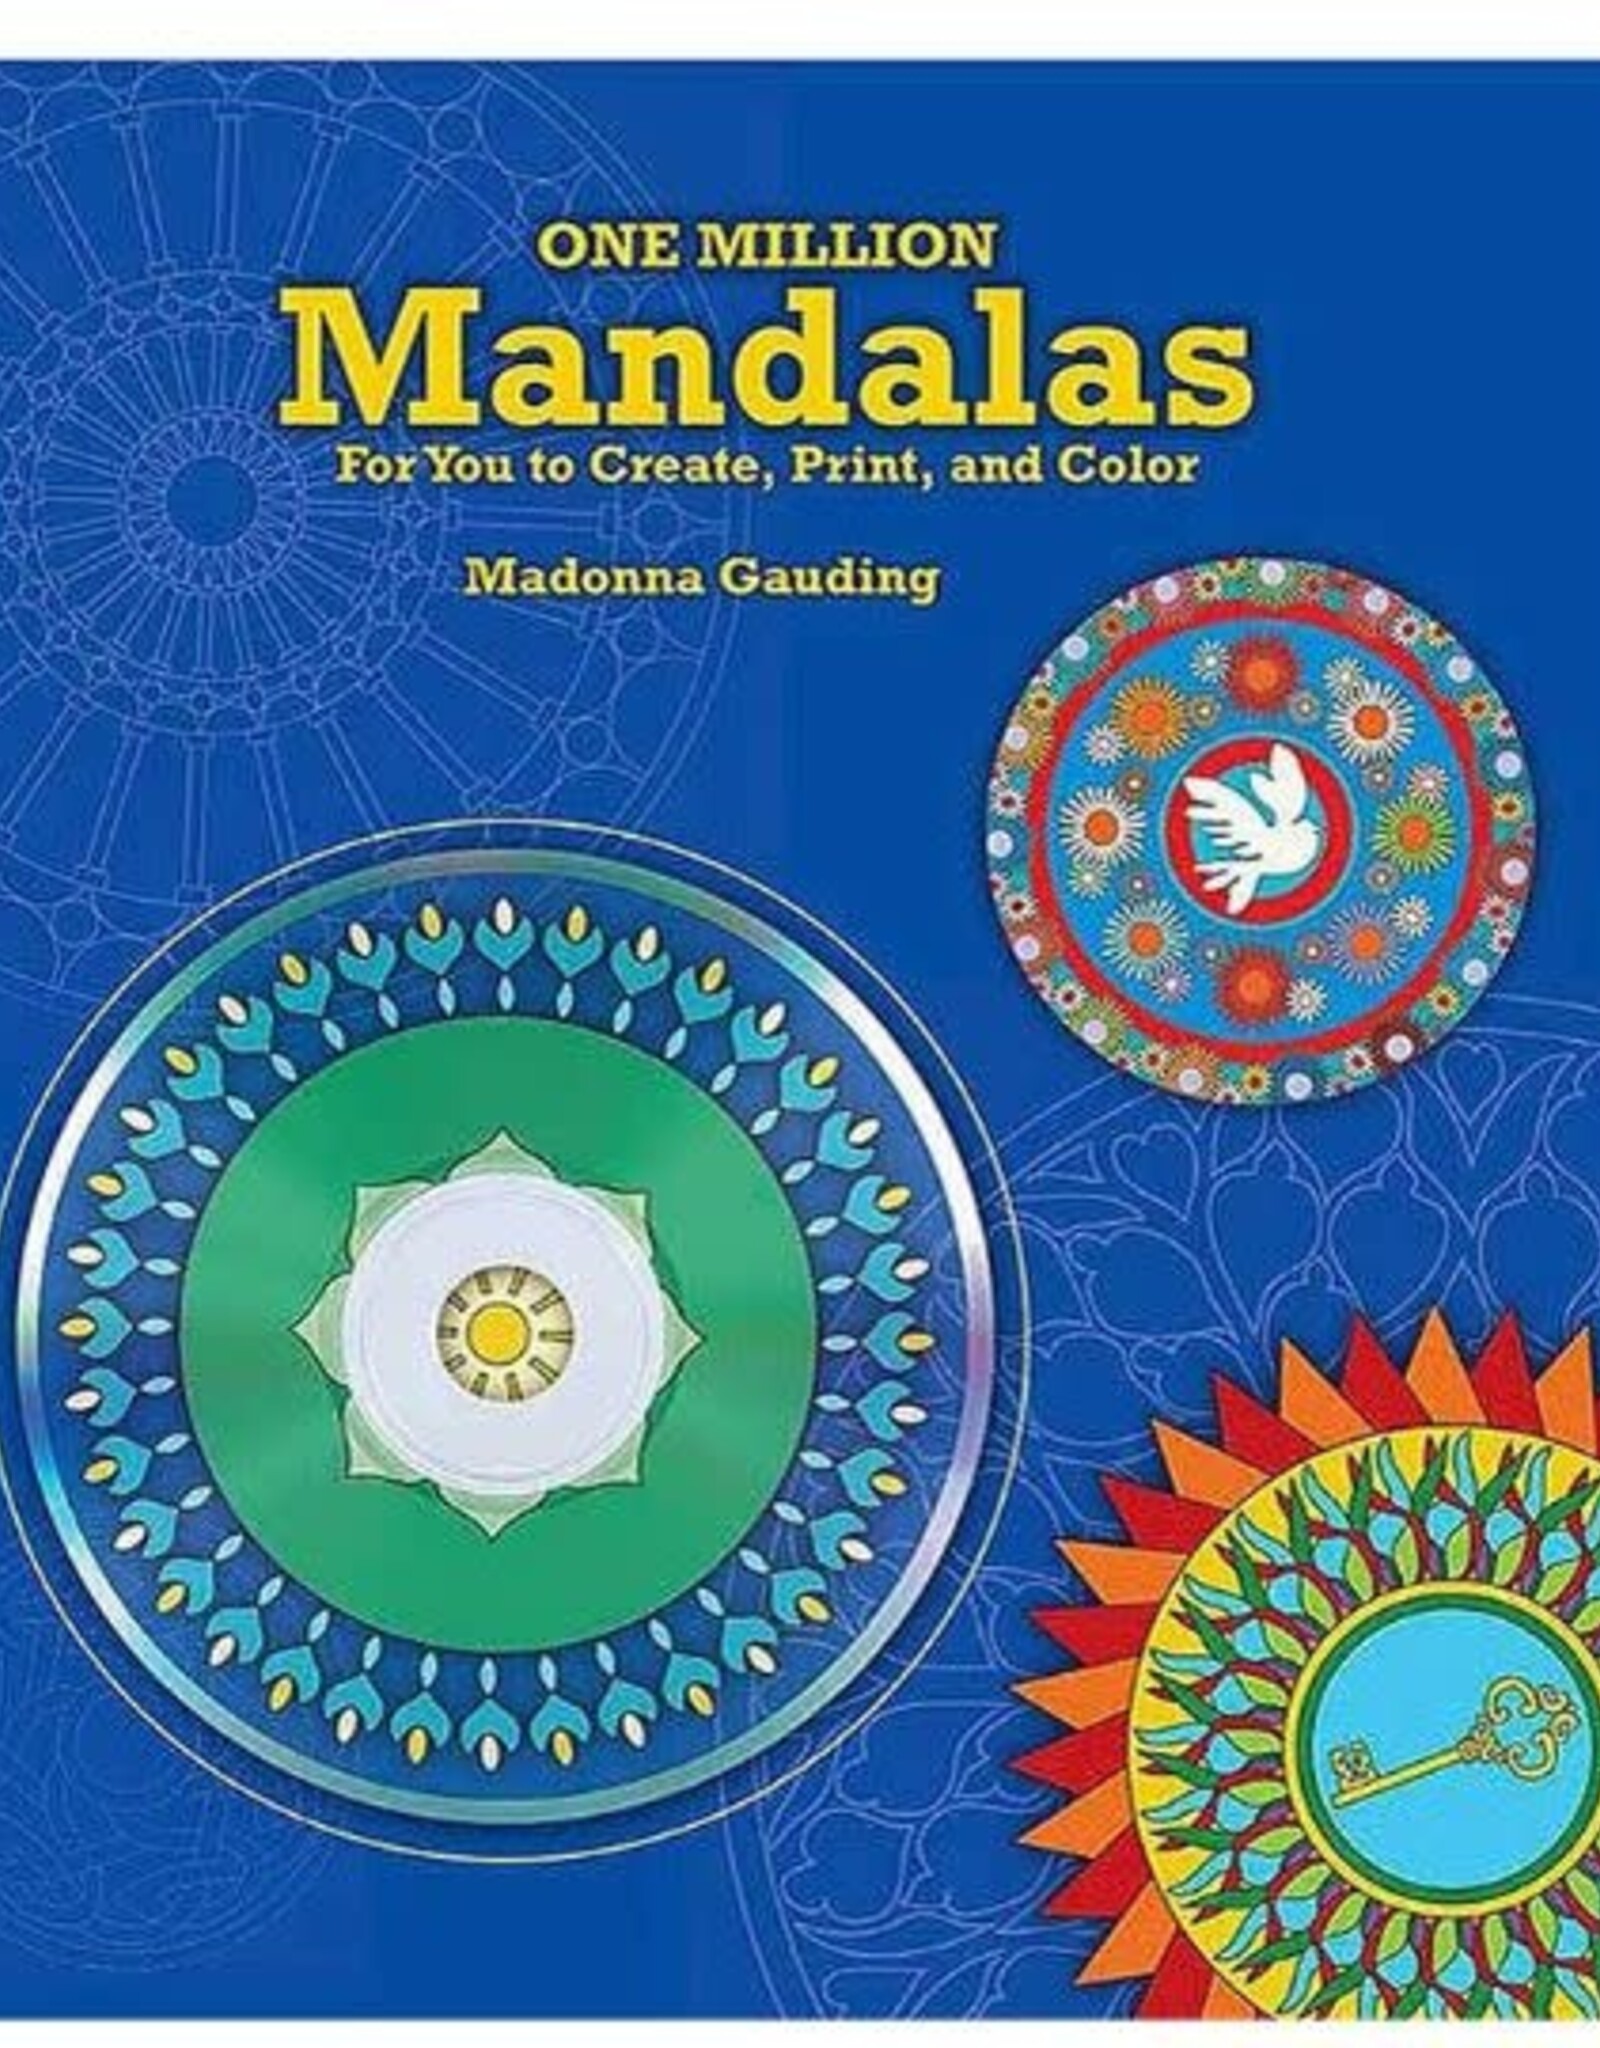 One Million Mandalas For you to Create, Print, Color  by Madonna Gauding